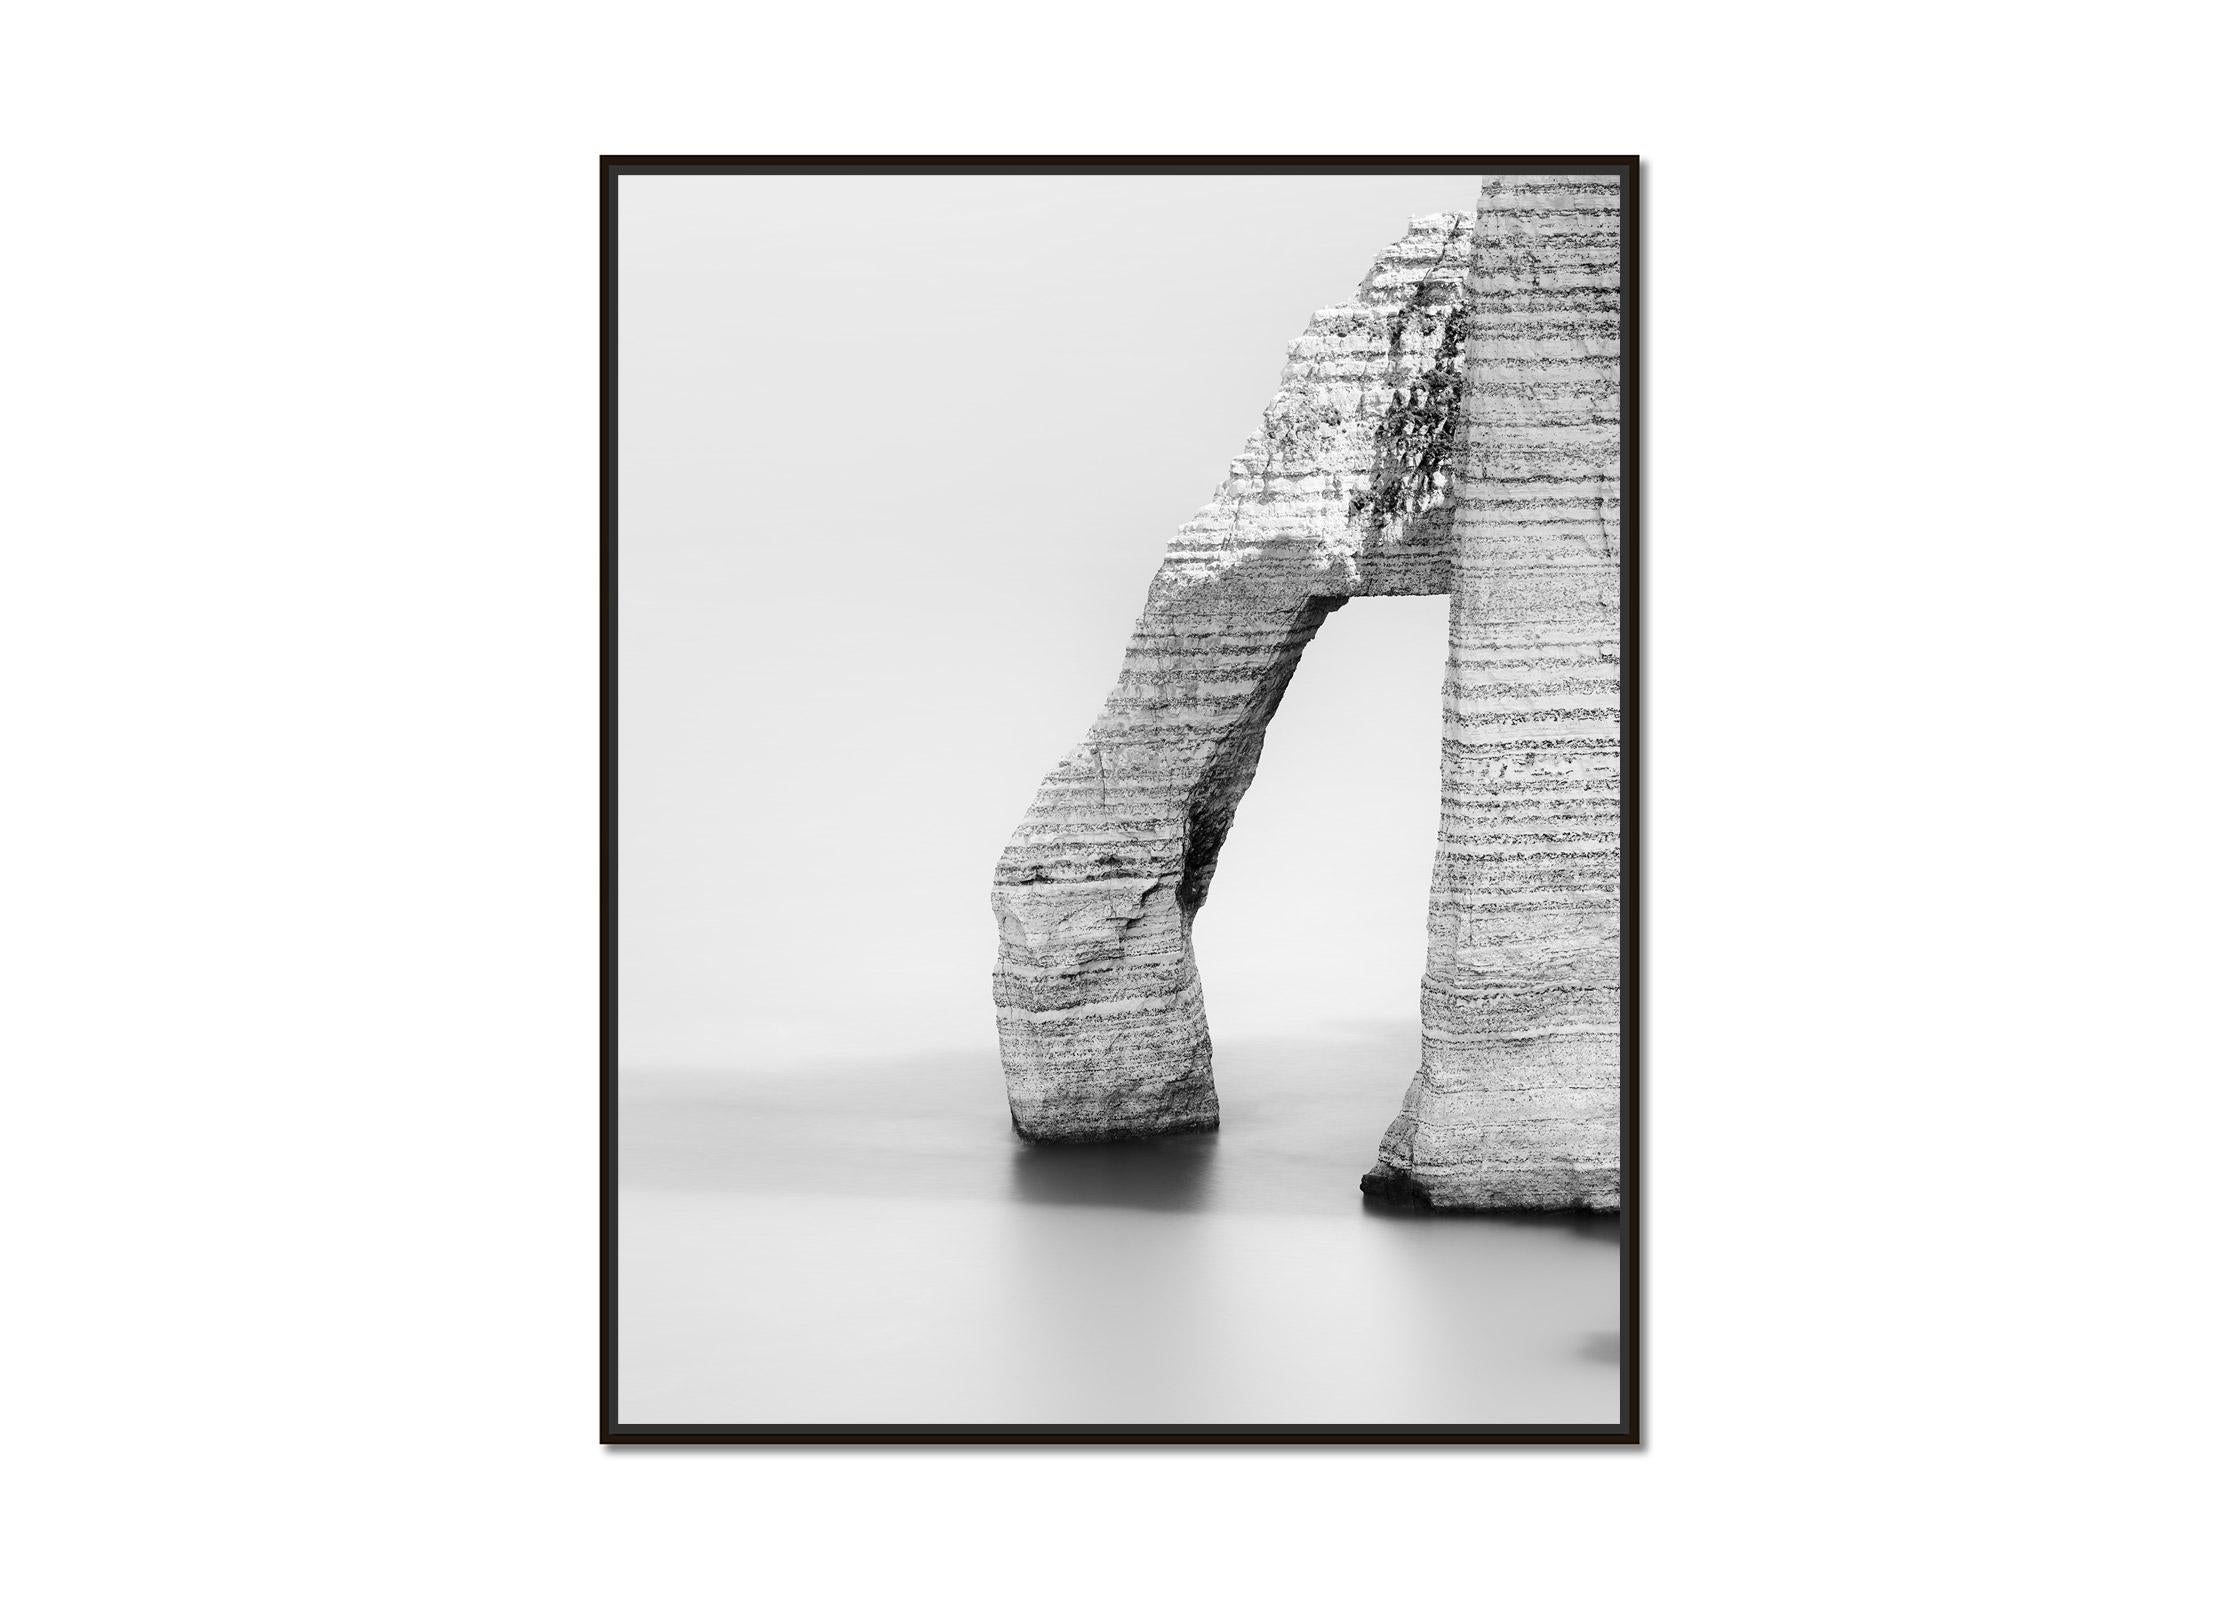 Cliffs of Etretat, Sea Arch, black and white photography, waterscape, landscape - Photograph by Gerald Berghammer